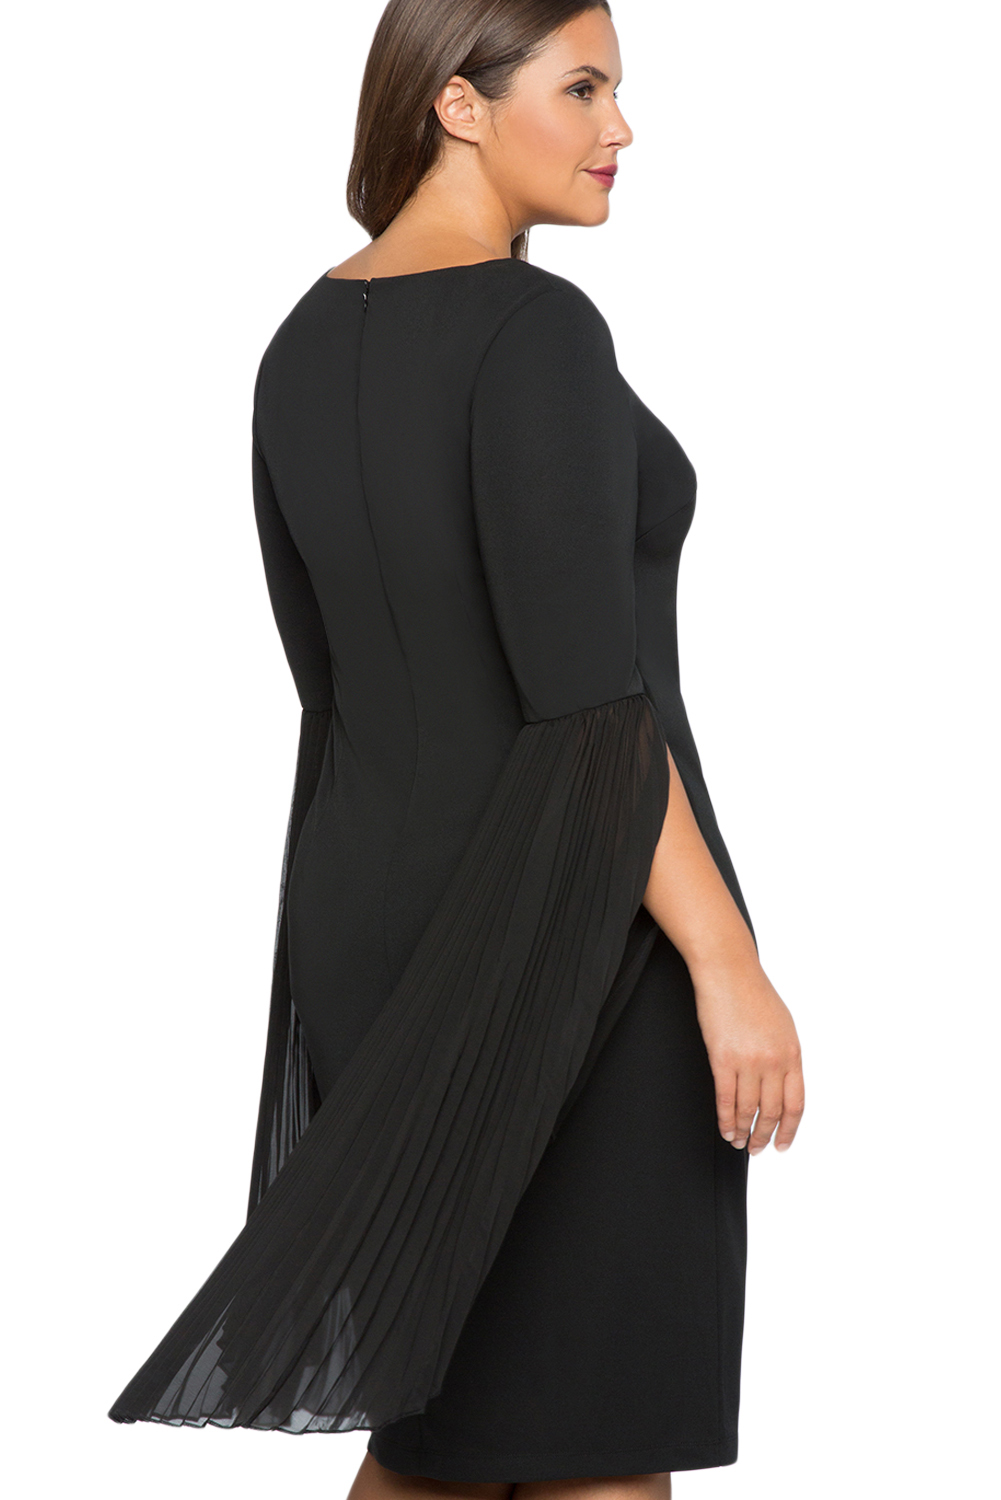 BY61753-2 Black Pleated Flare Sleeve Plus Size Dress